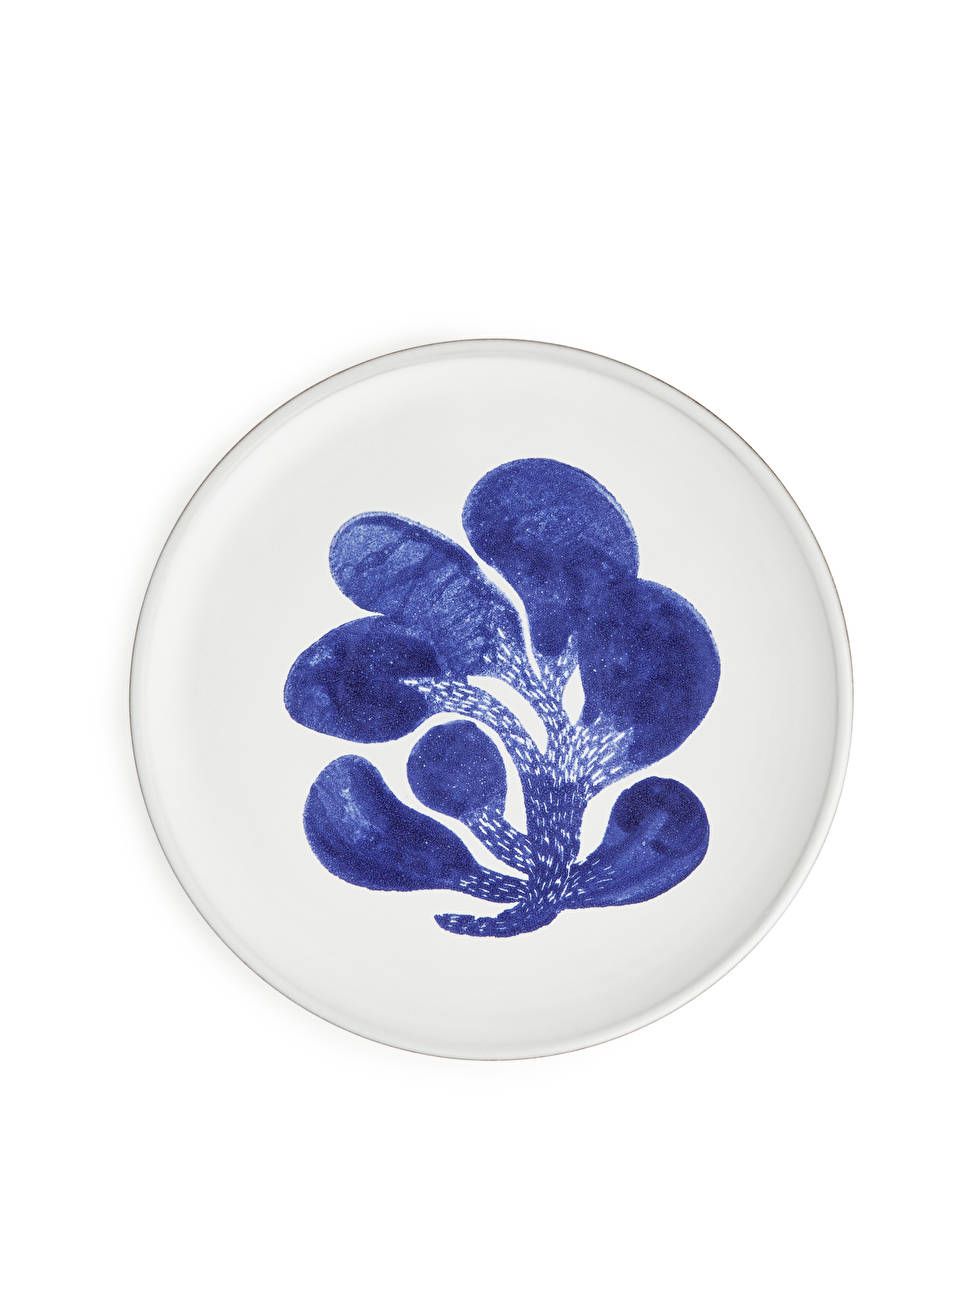 Hand-Painted Plate 22 cm - Off White/Bright Blue - ARKET GB | ARKET